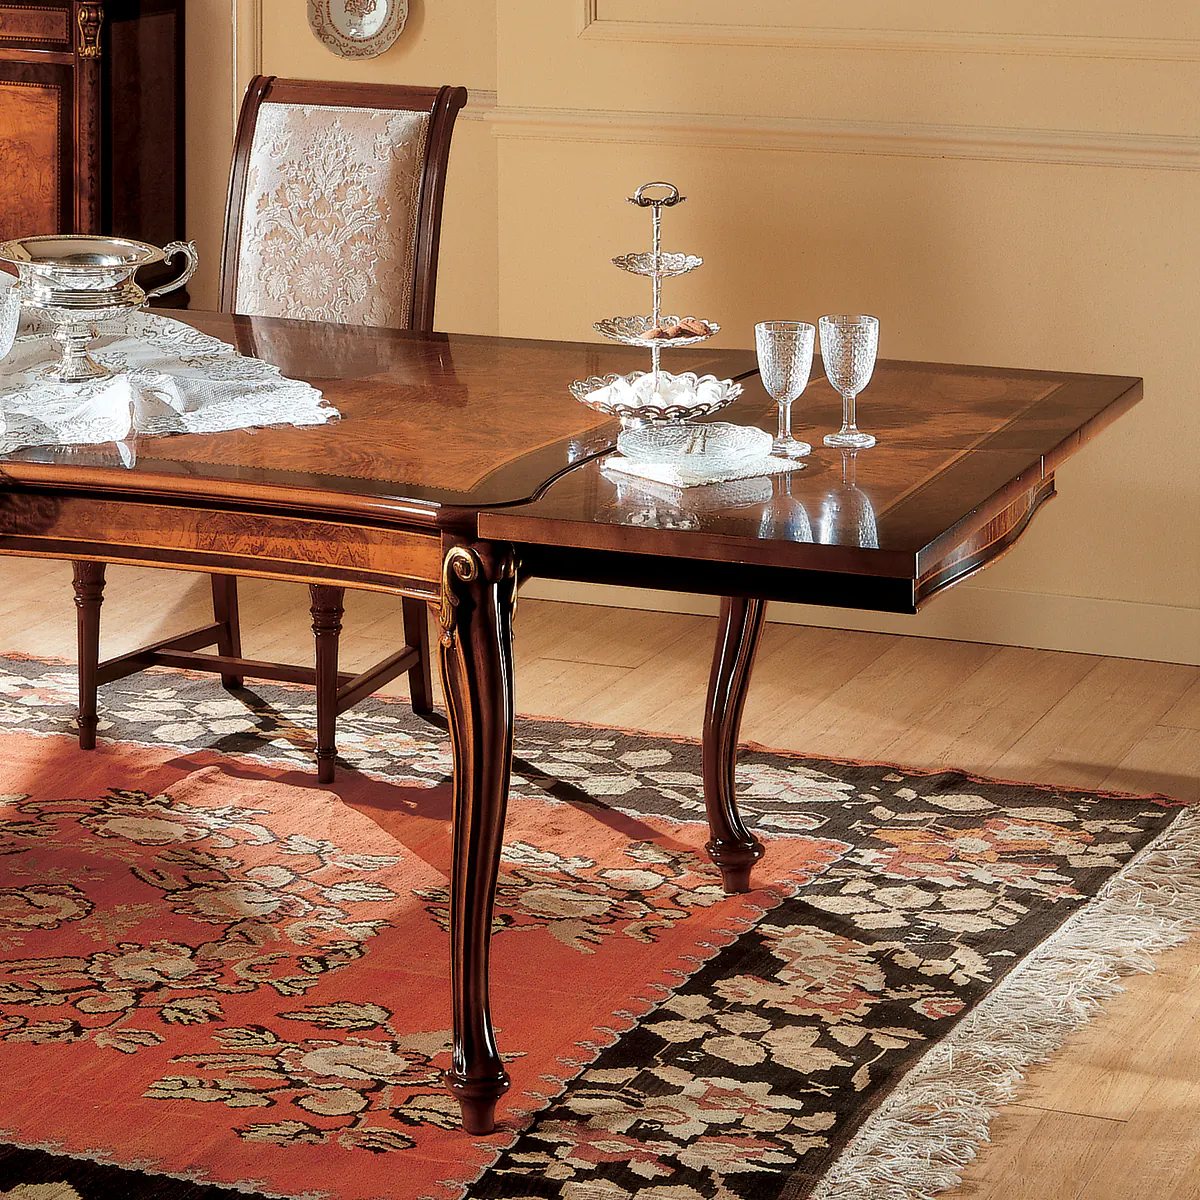 Royal rectangular table with side extens.